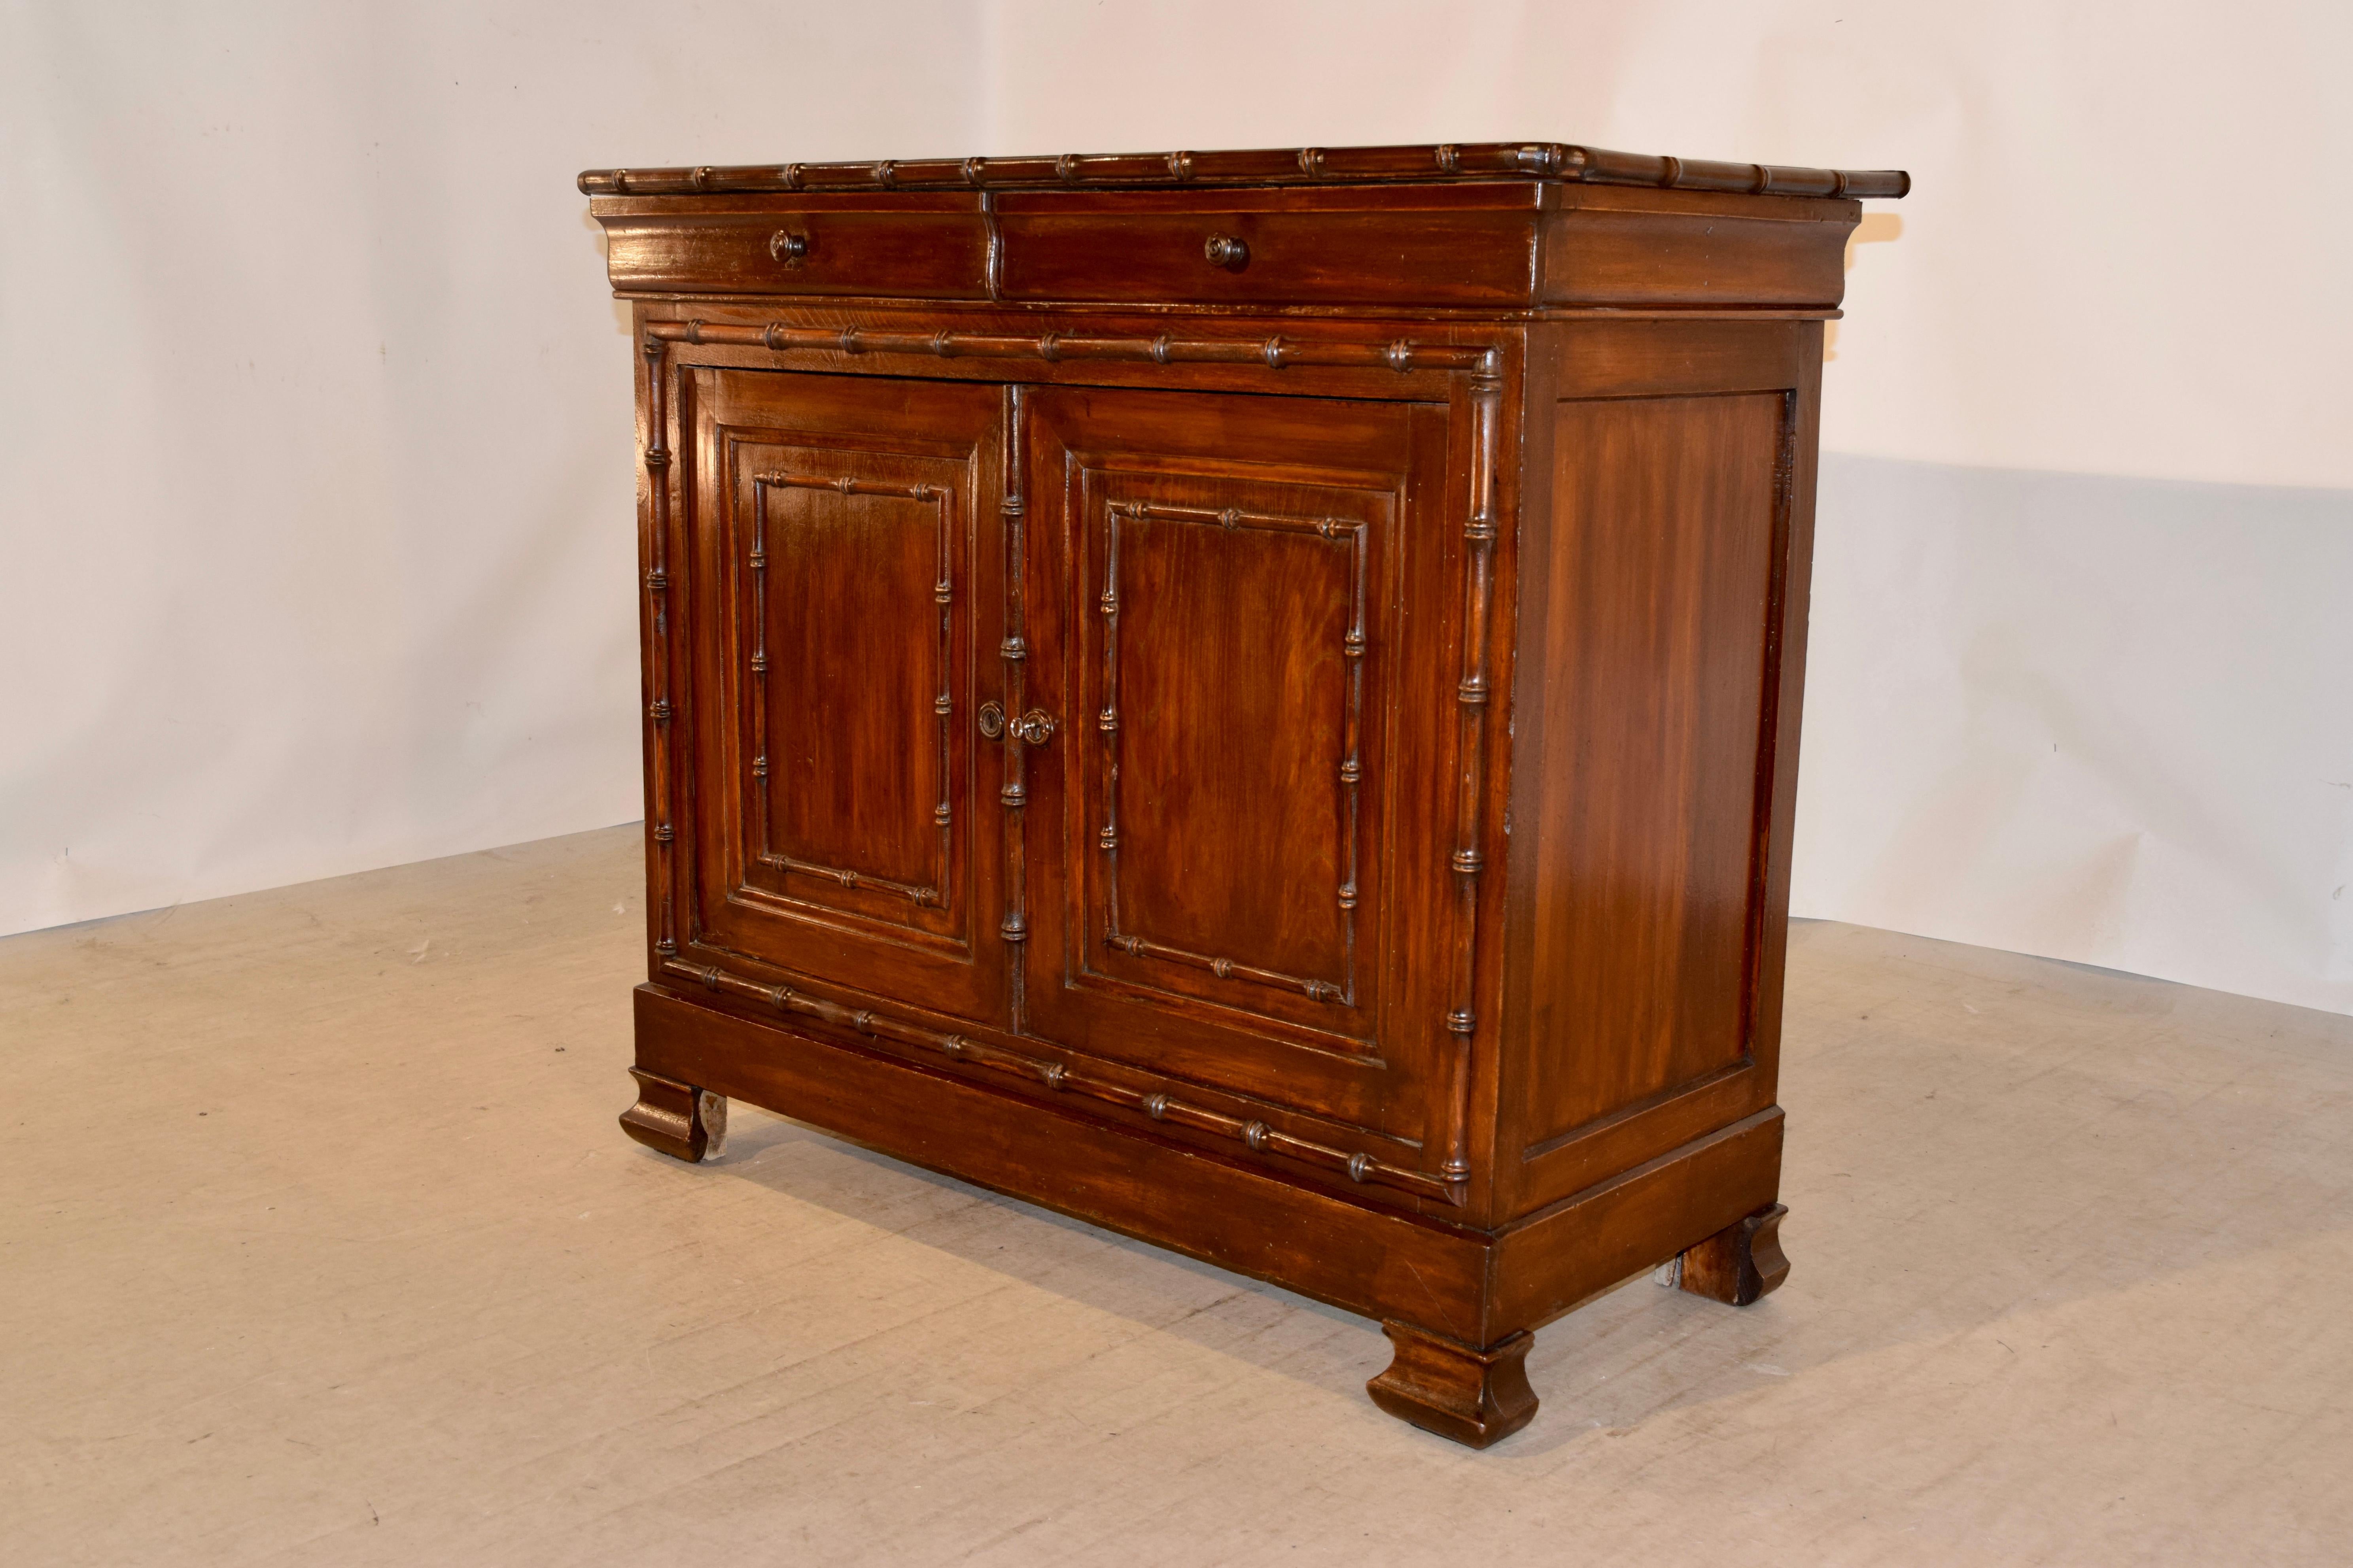 19th century Louis Philippe enfilade with faux bamboo molding. The top has chamfered corners and is surrounded by faux bamboo turned moldings, following down to a simple case with simple sides and the front containing two shaped drawers over two